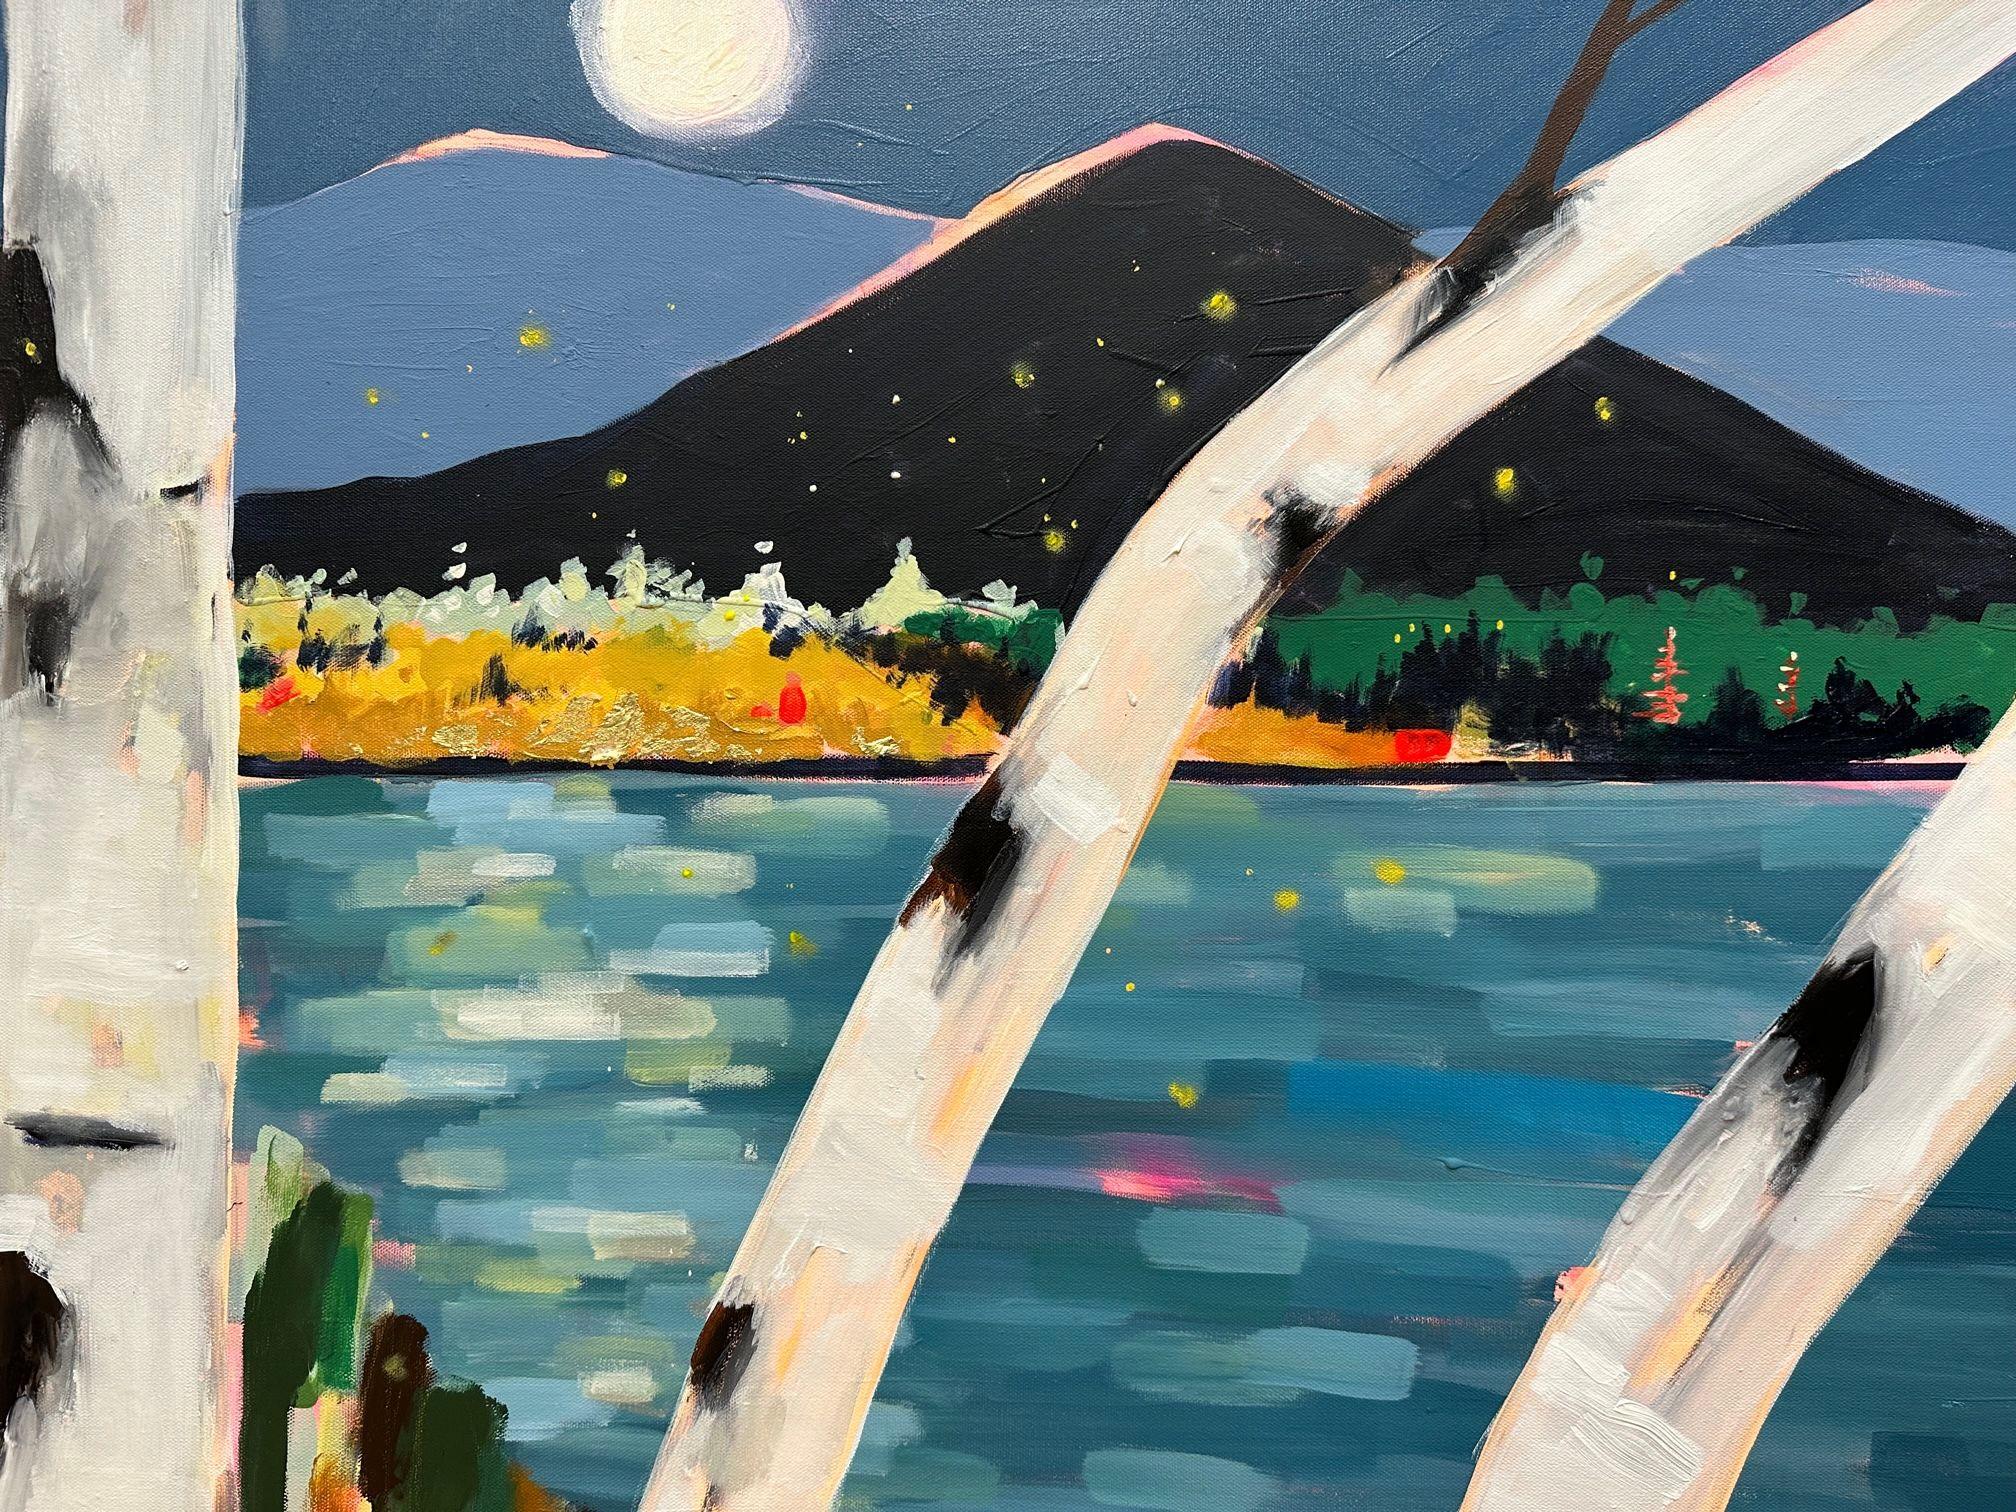 This nostalgic summertime painting is of what makes the summer special. It is twilight and the moon shines over the fireflies. The Birches are on the edge of the lake almost as if they are guardians. The shimmer of the lake says come take one more